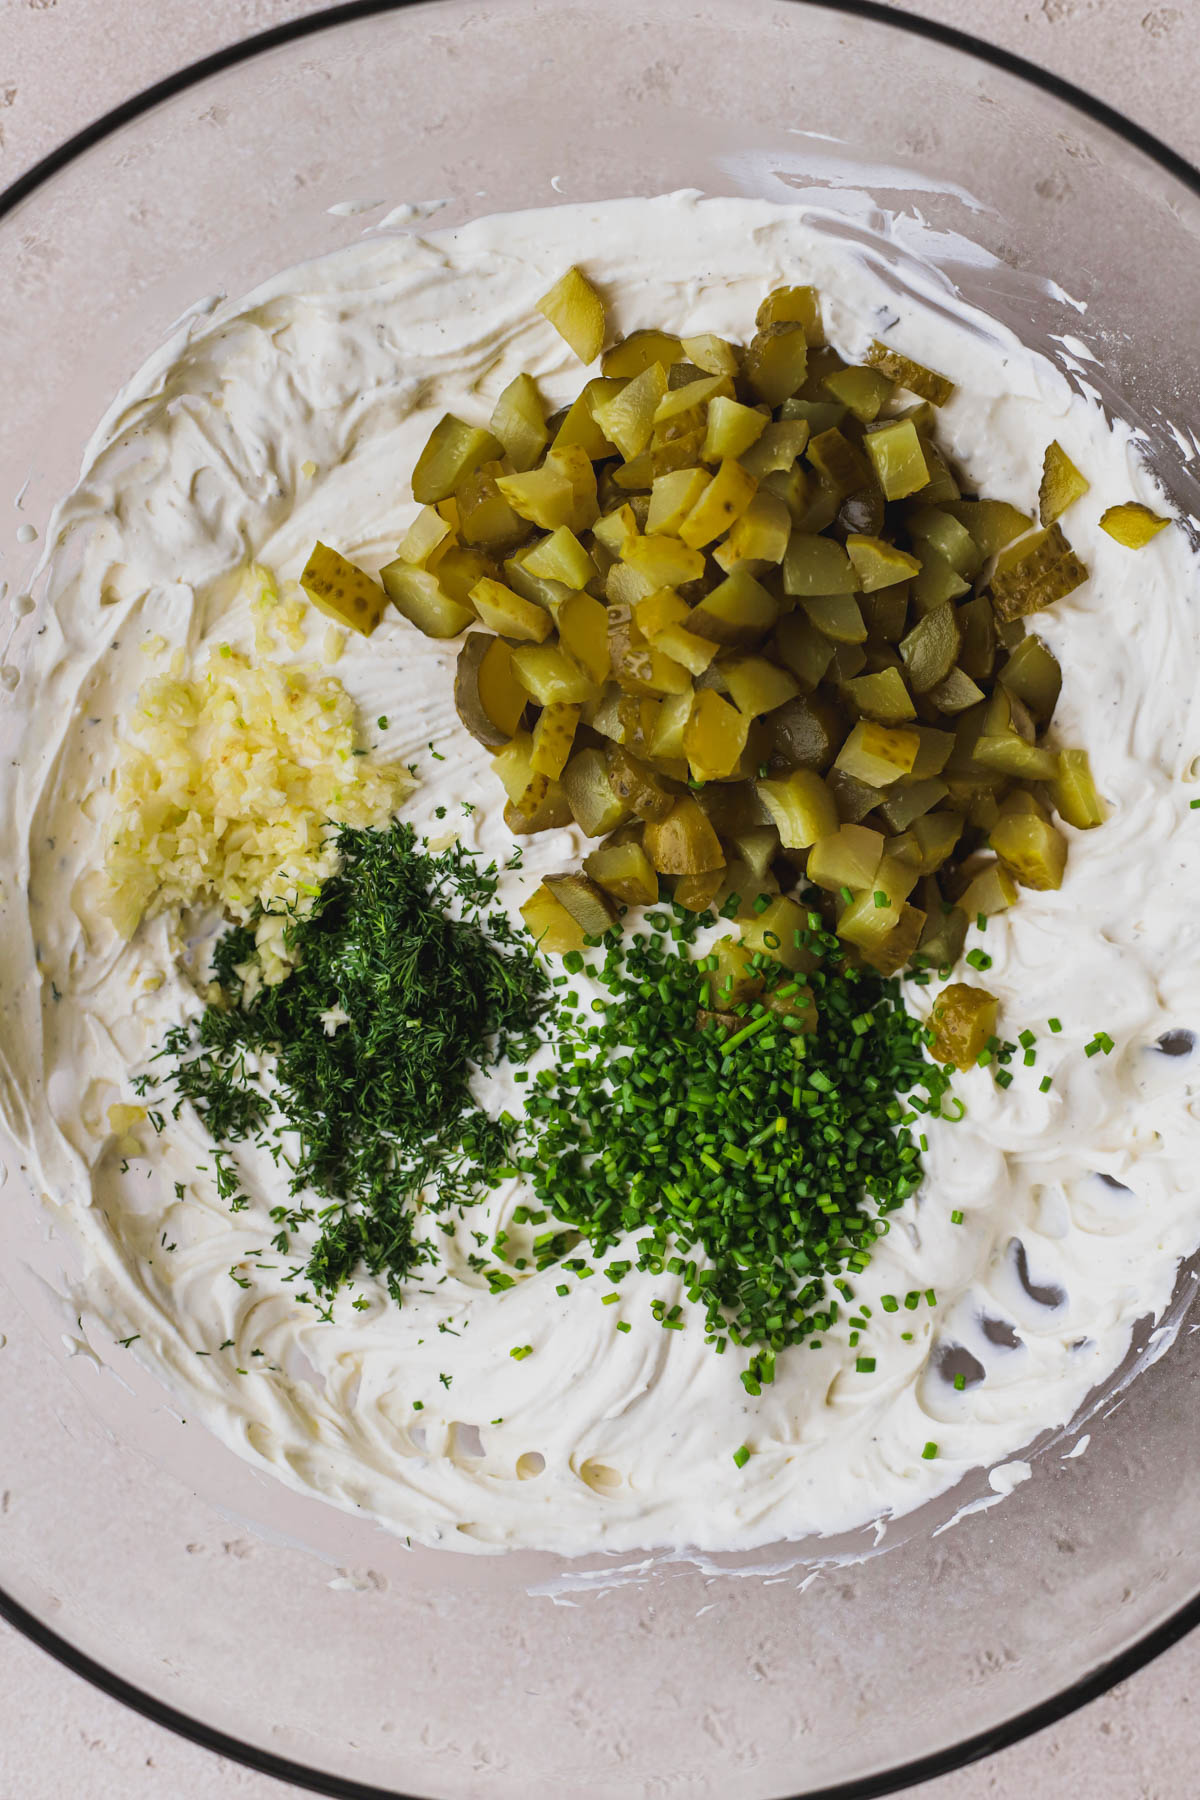 Cream cheese, sour cream, ranch dressing seasoning, chopped pickles, garlic, dill, and chives.  